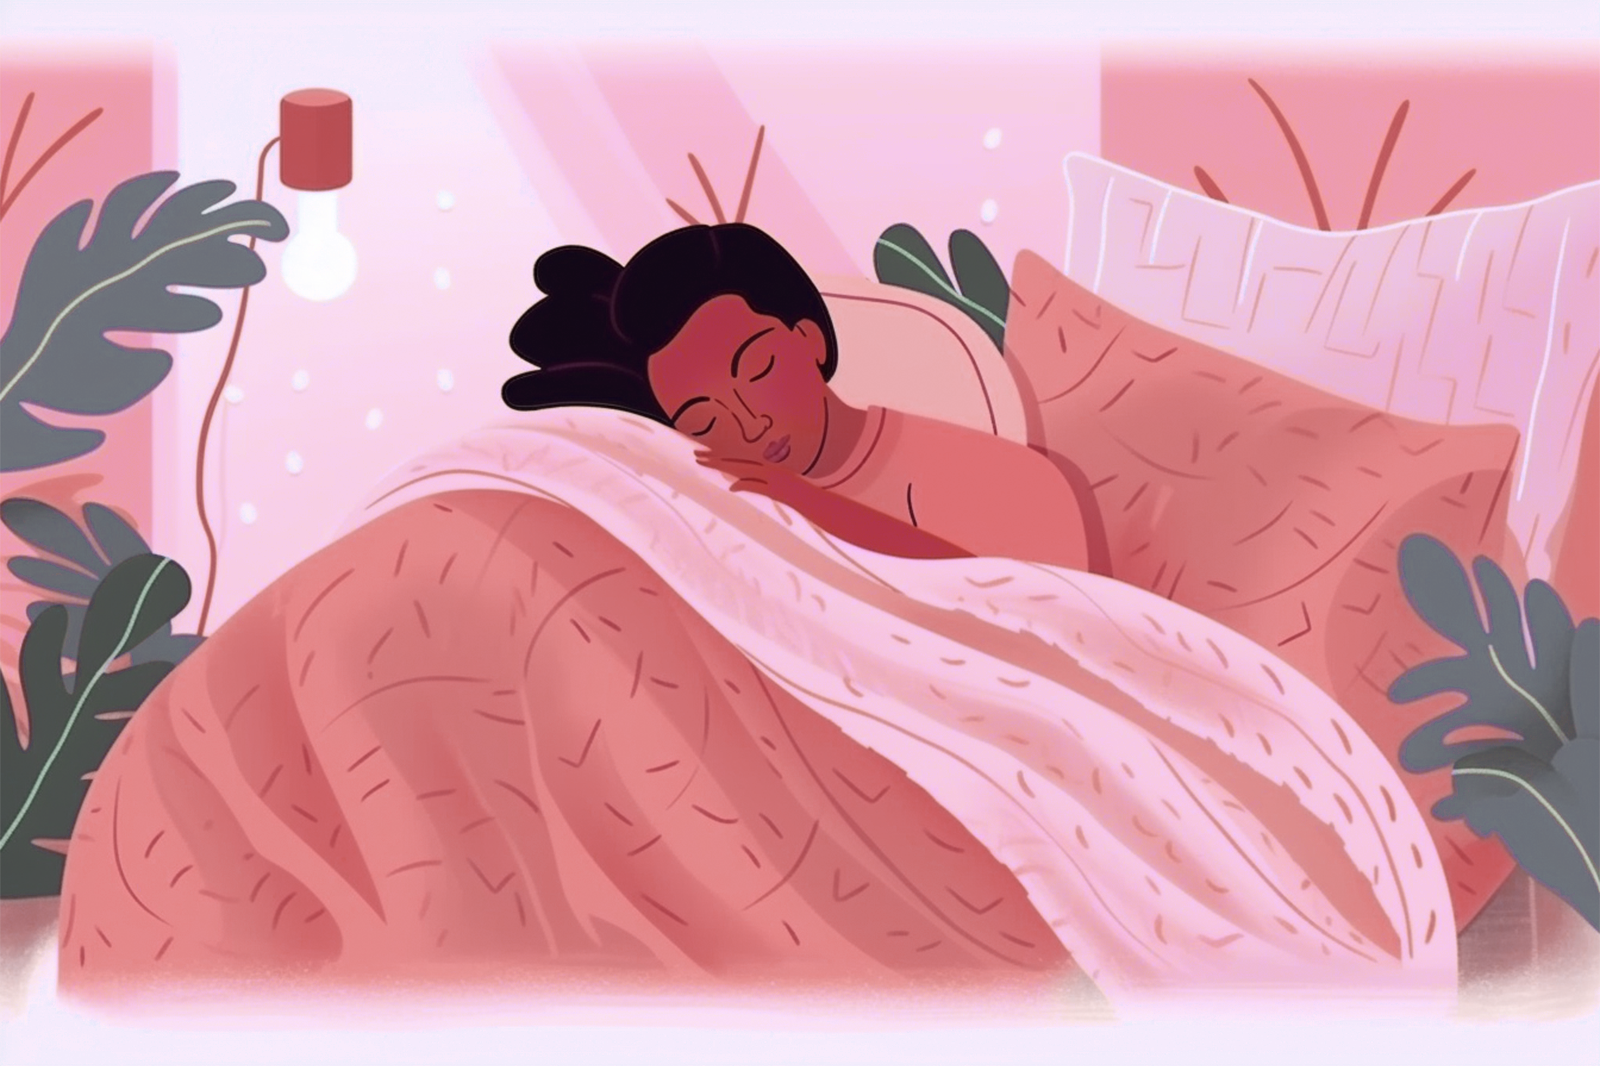 A woman is sleeping under a pink sheet which covers her body, and there are some leaves in the room